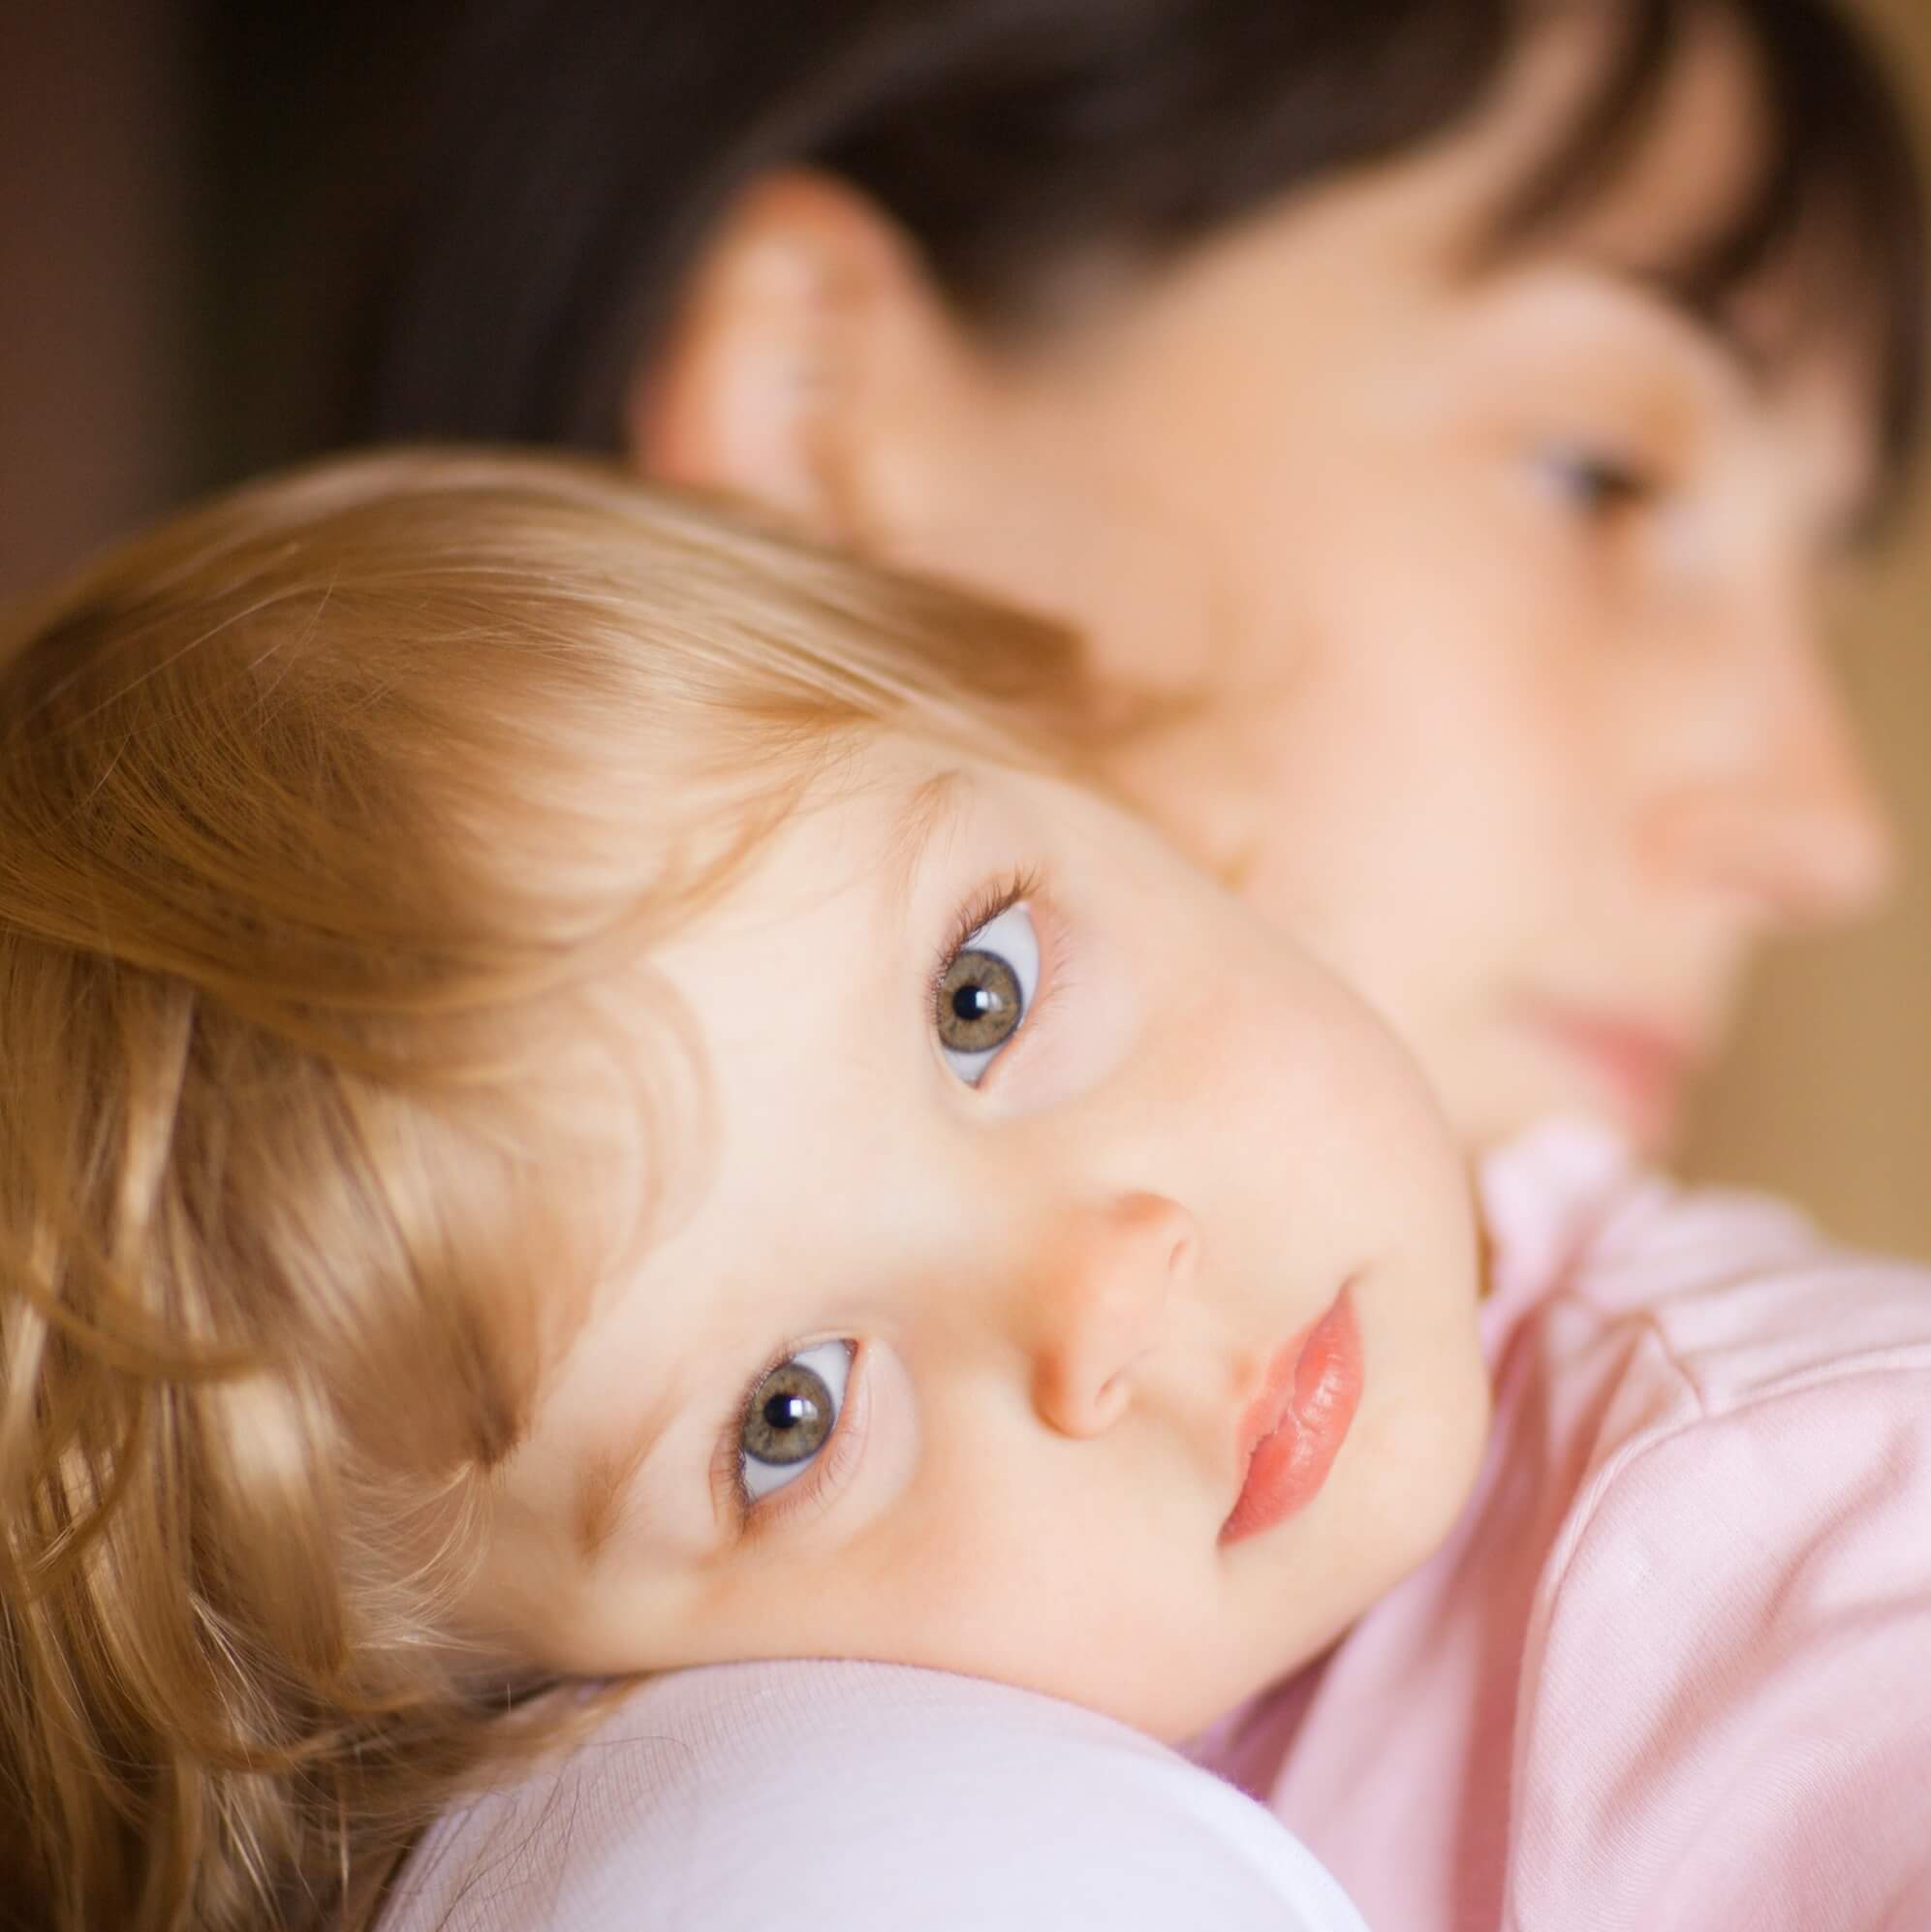 A small childs face as she lays her head on a woman's shoulder